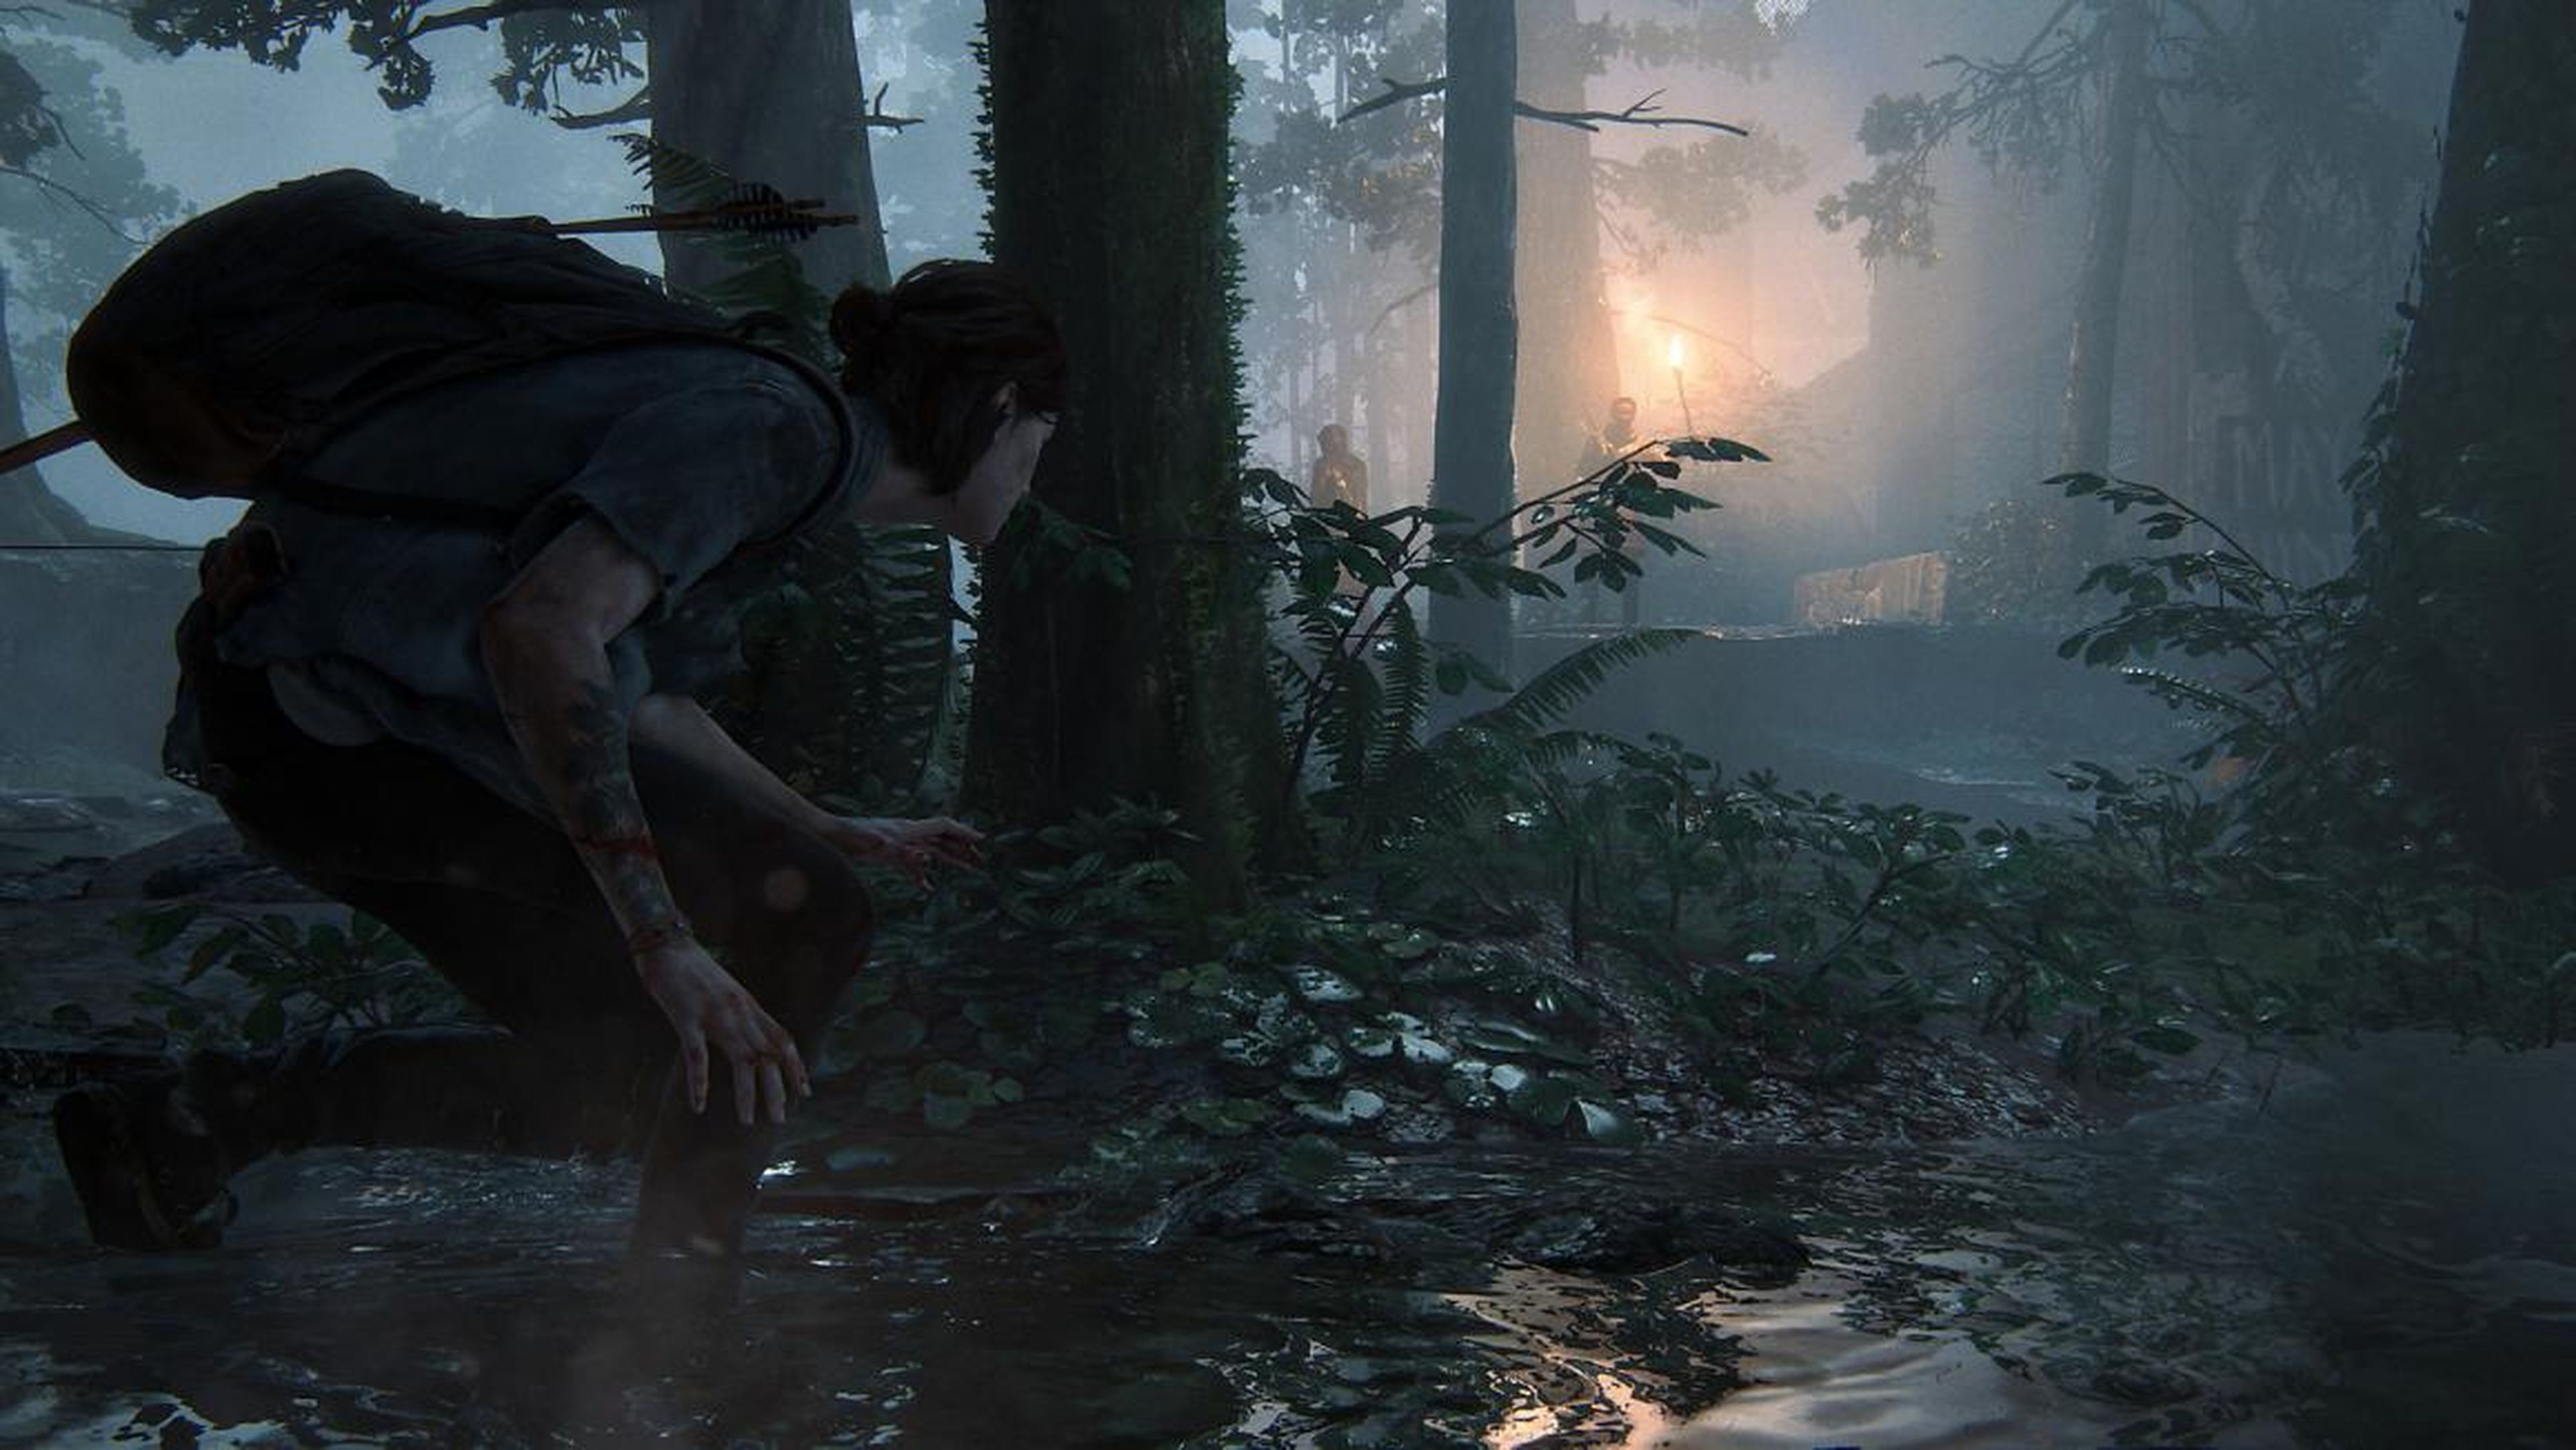 "The Last of Us Part II" will continue the same style of survival-based action. Ellie will have to collect supplies and craft equipment to help her stay a step ahead of danger.